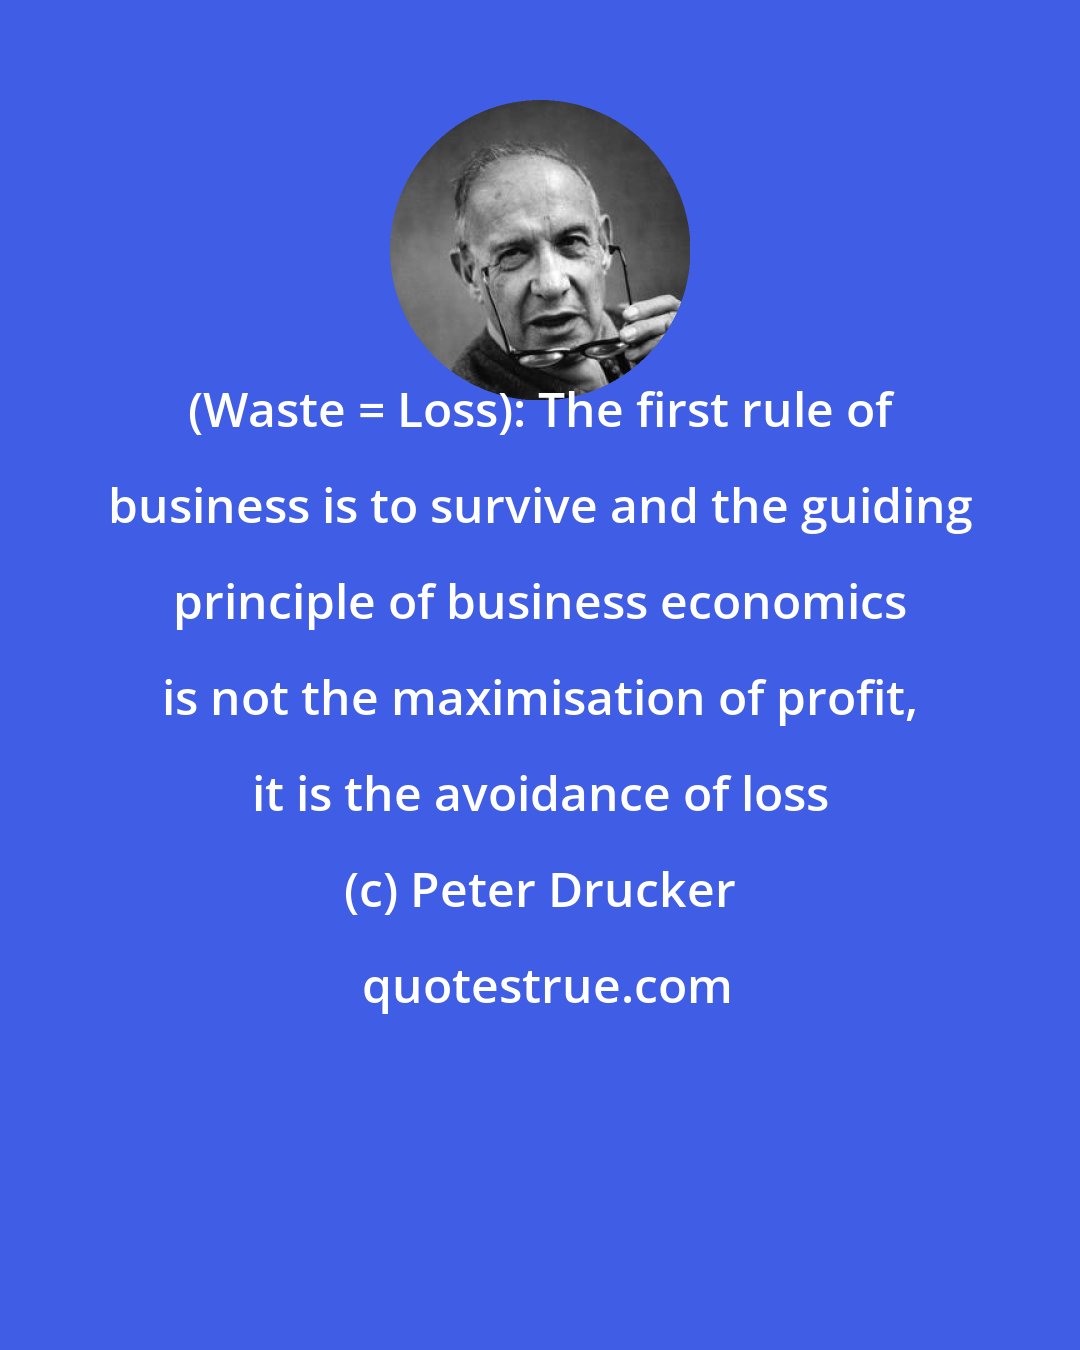 Peter Drucker: (Waste = Loss): The first rule of business is to survive and the guiding principle of business economics is not the maximisation of profit, it is the avoidance of loss